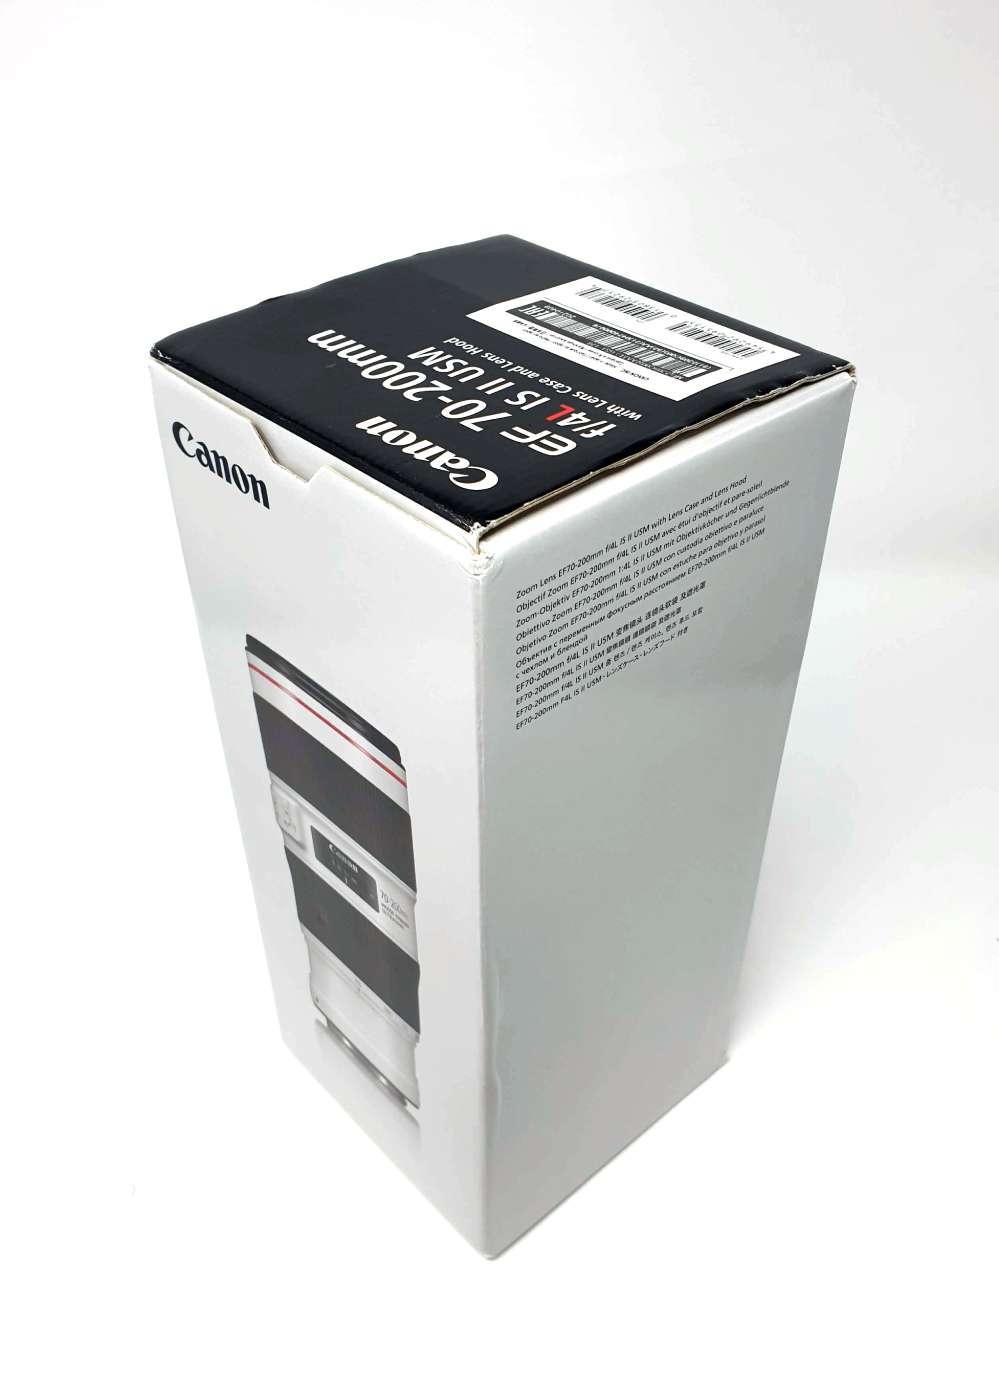 Canon EF 70-200mm f4L IS II USM Lens - Product Photo 9 - Product Box Standing Up